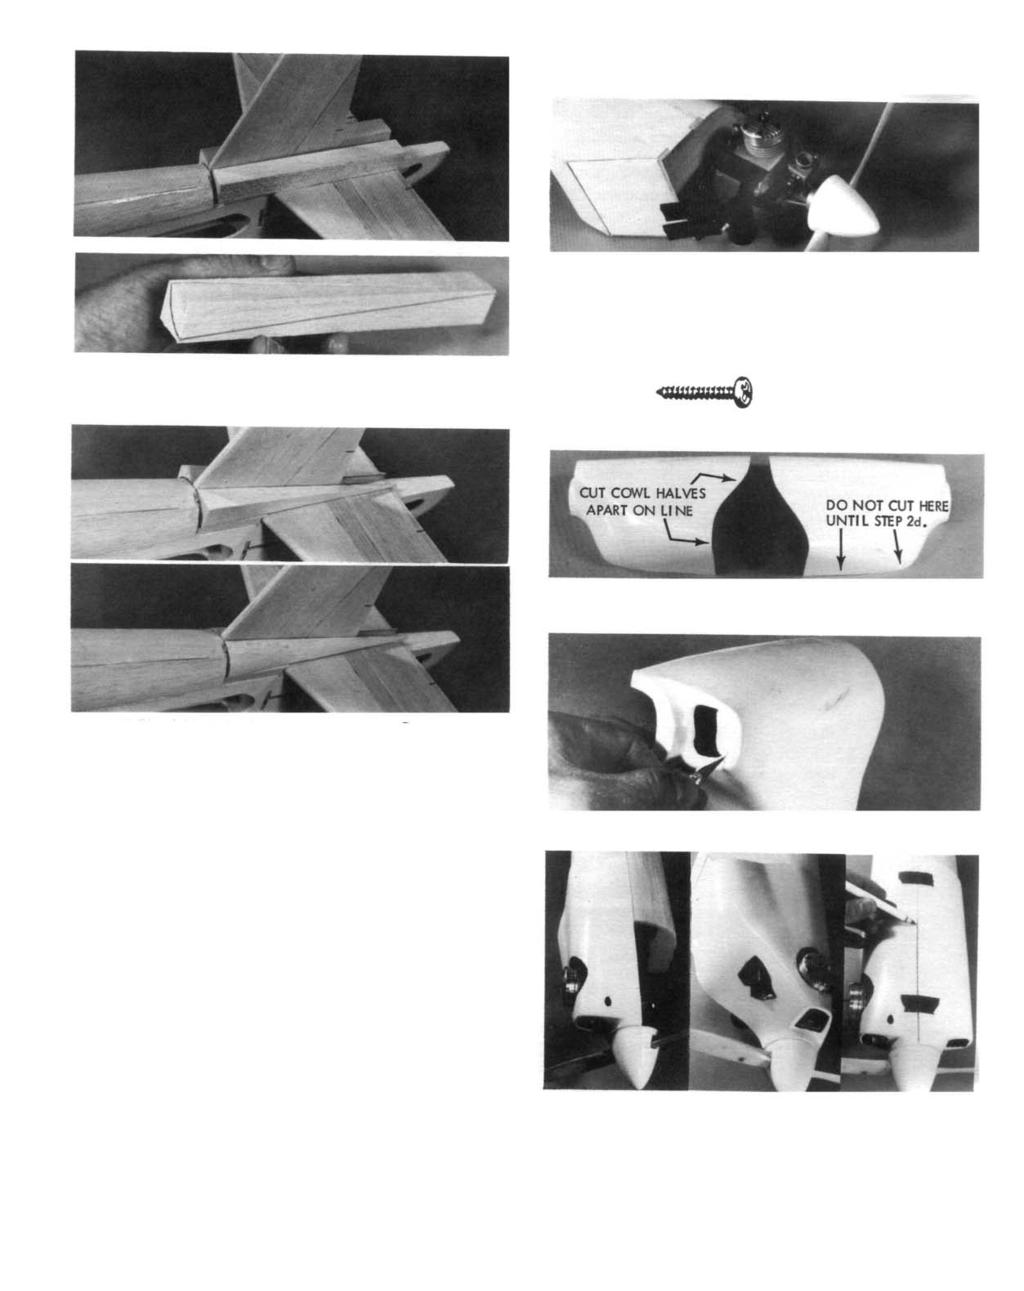 COWL ASSEMBLY 29. Cut 7/8 sq.x16 balsa block into two 8 pieces. Then, taper sand to pointed fairing shape as shown in photos above and fuse views on plan. 1.